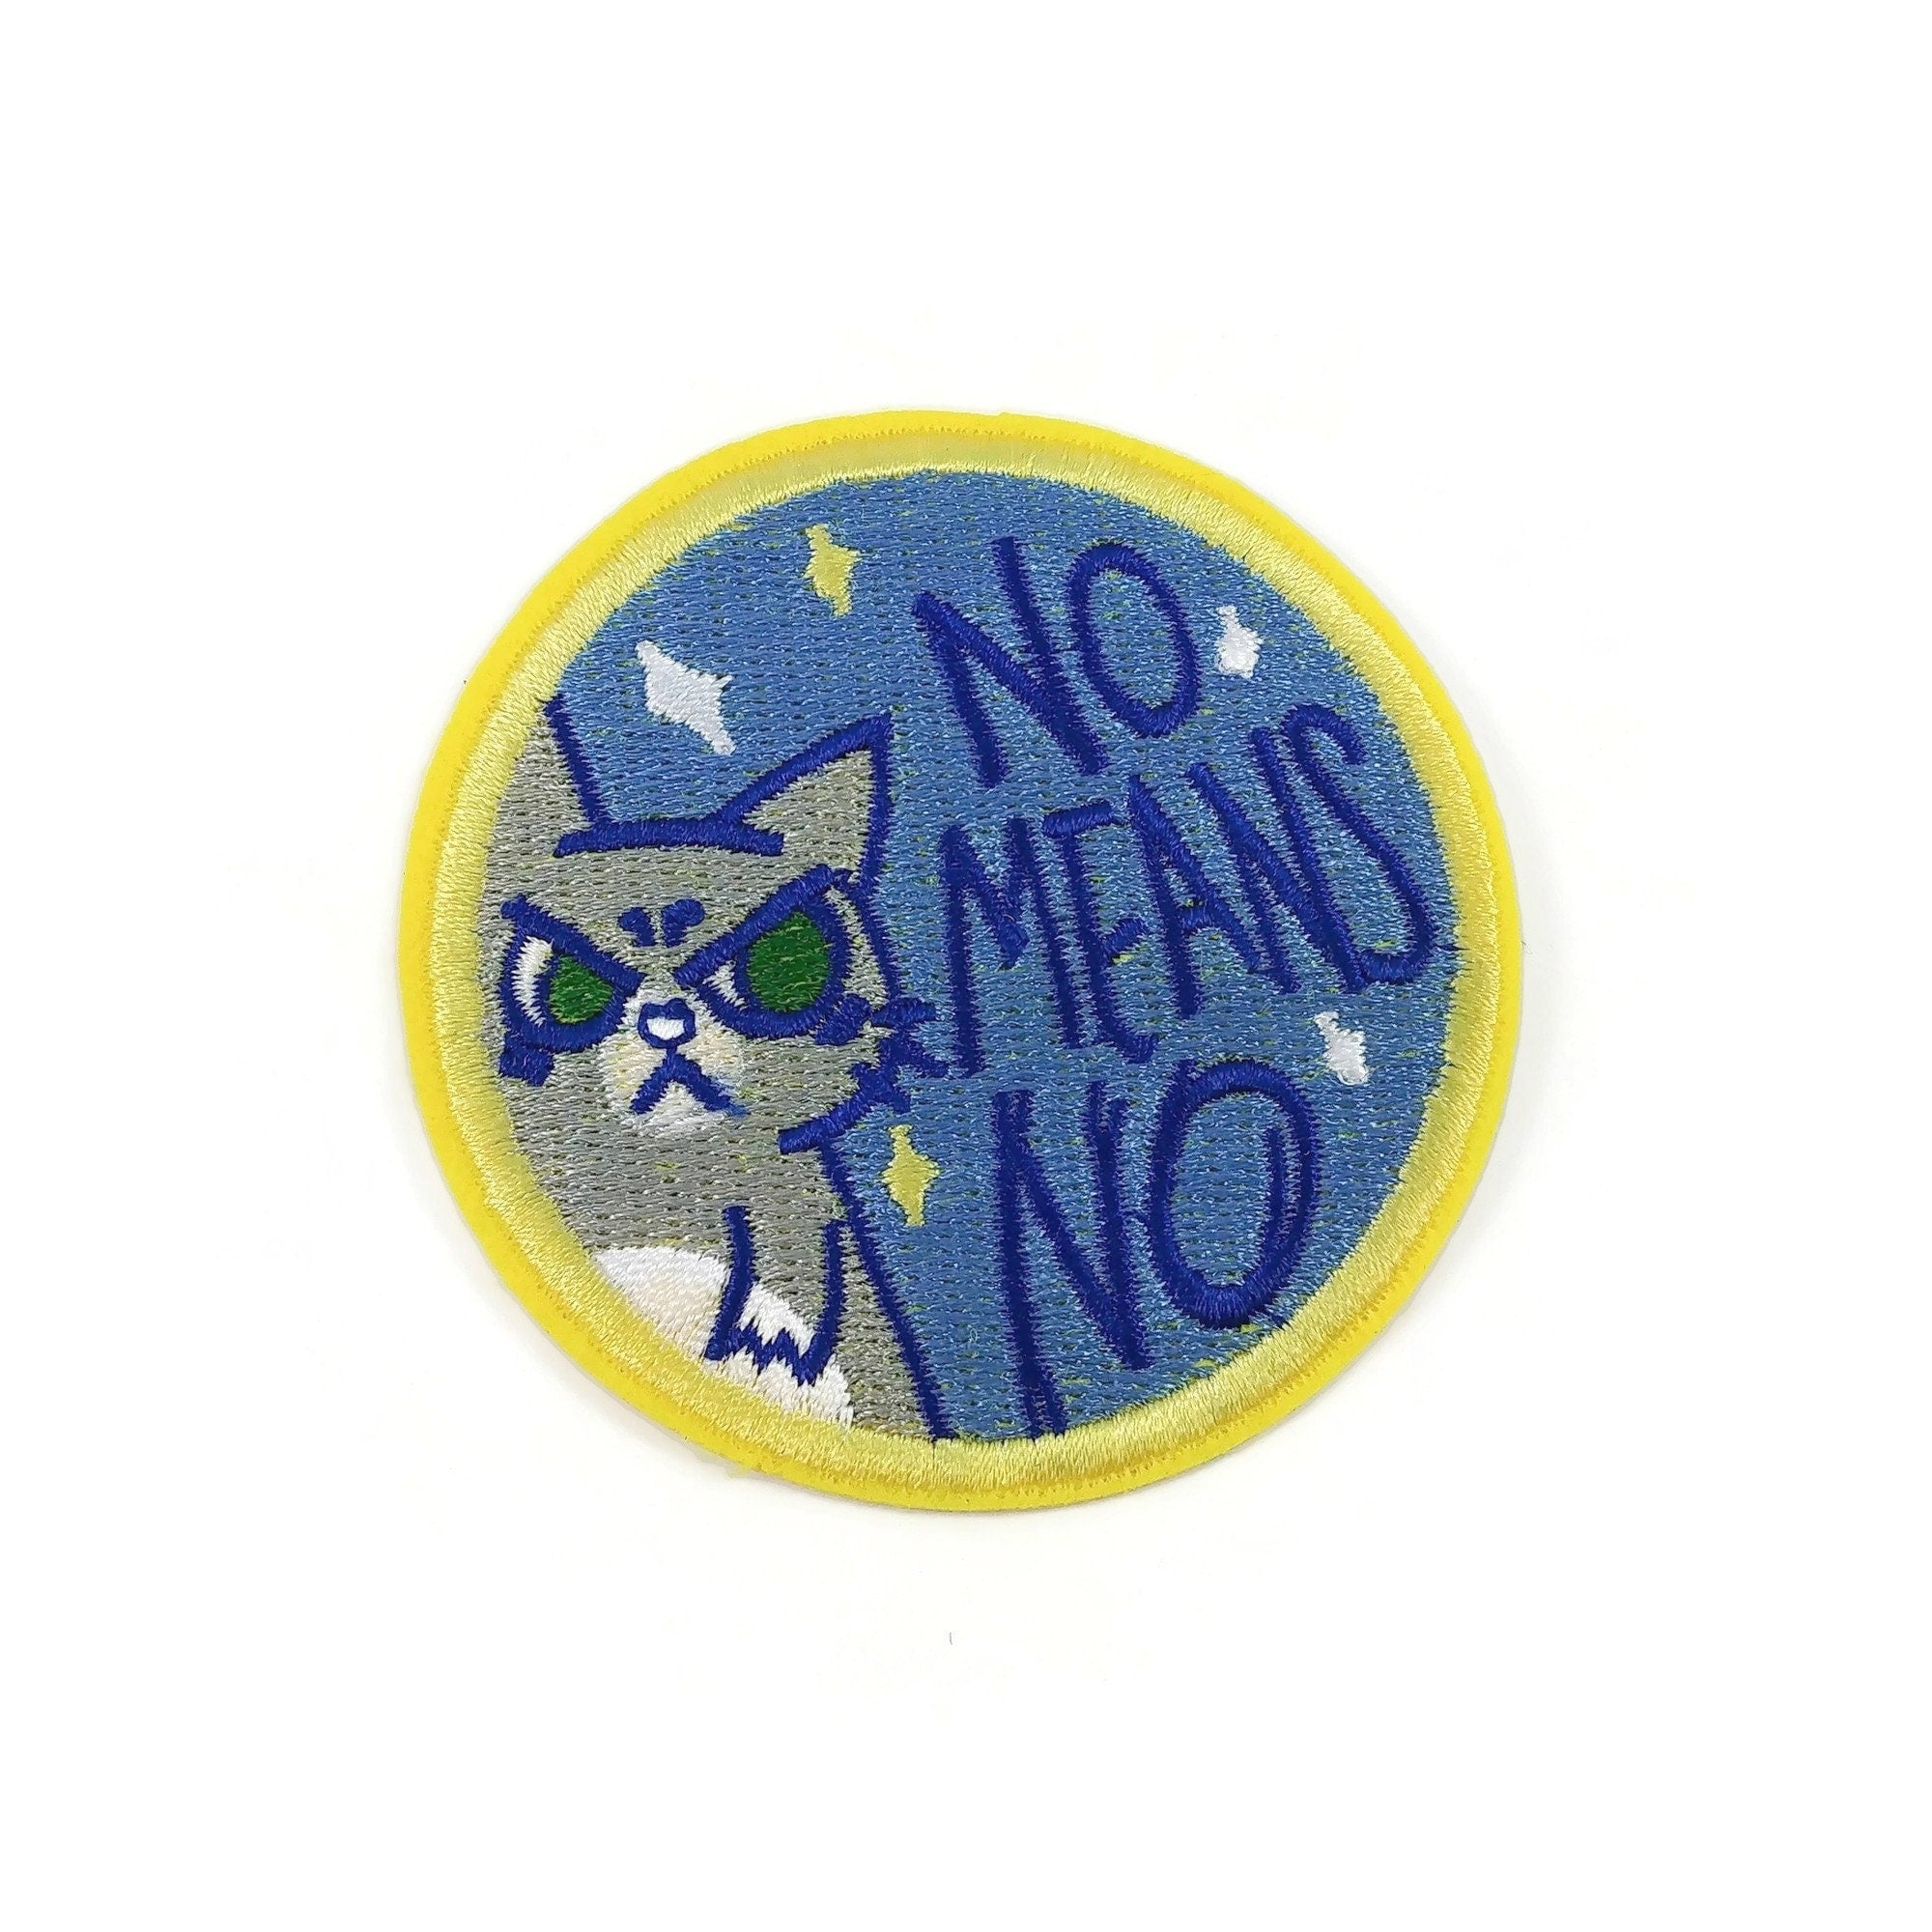 NO MEANS NO iron on patch, Cat embroidered sew on, Fun badge appliques